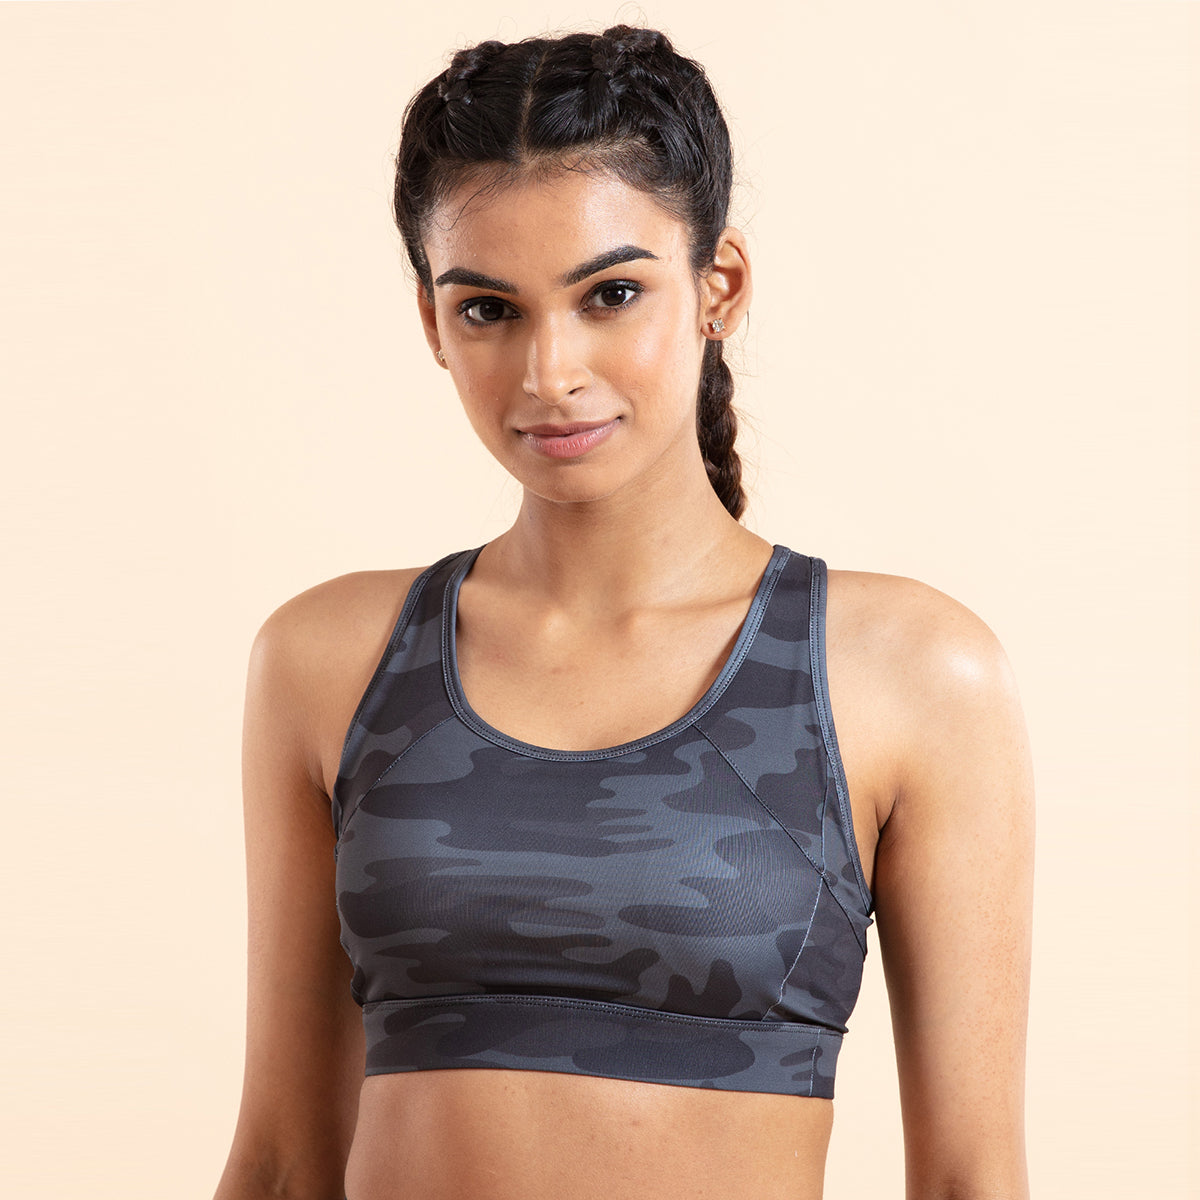 Nykd All Day On-Trend Sports Bra With Keyhole Back- NYK082 Camo